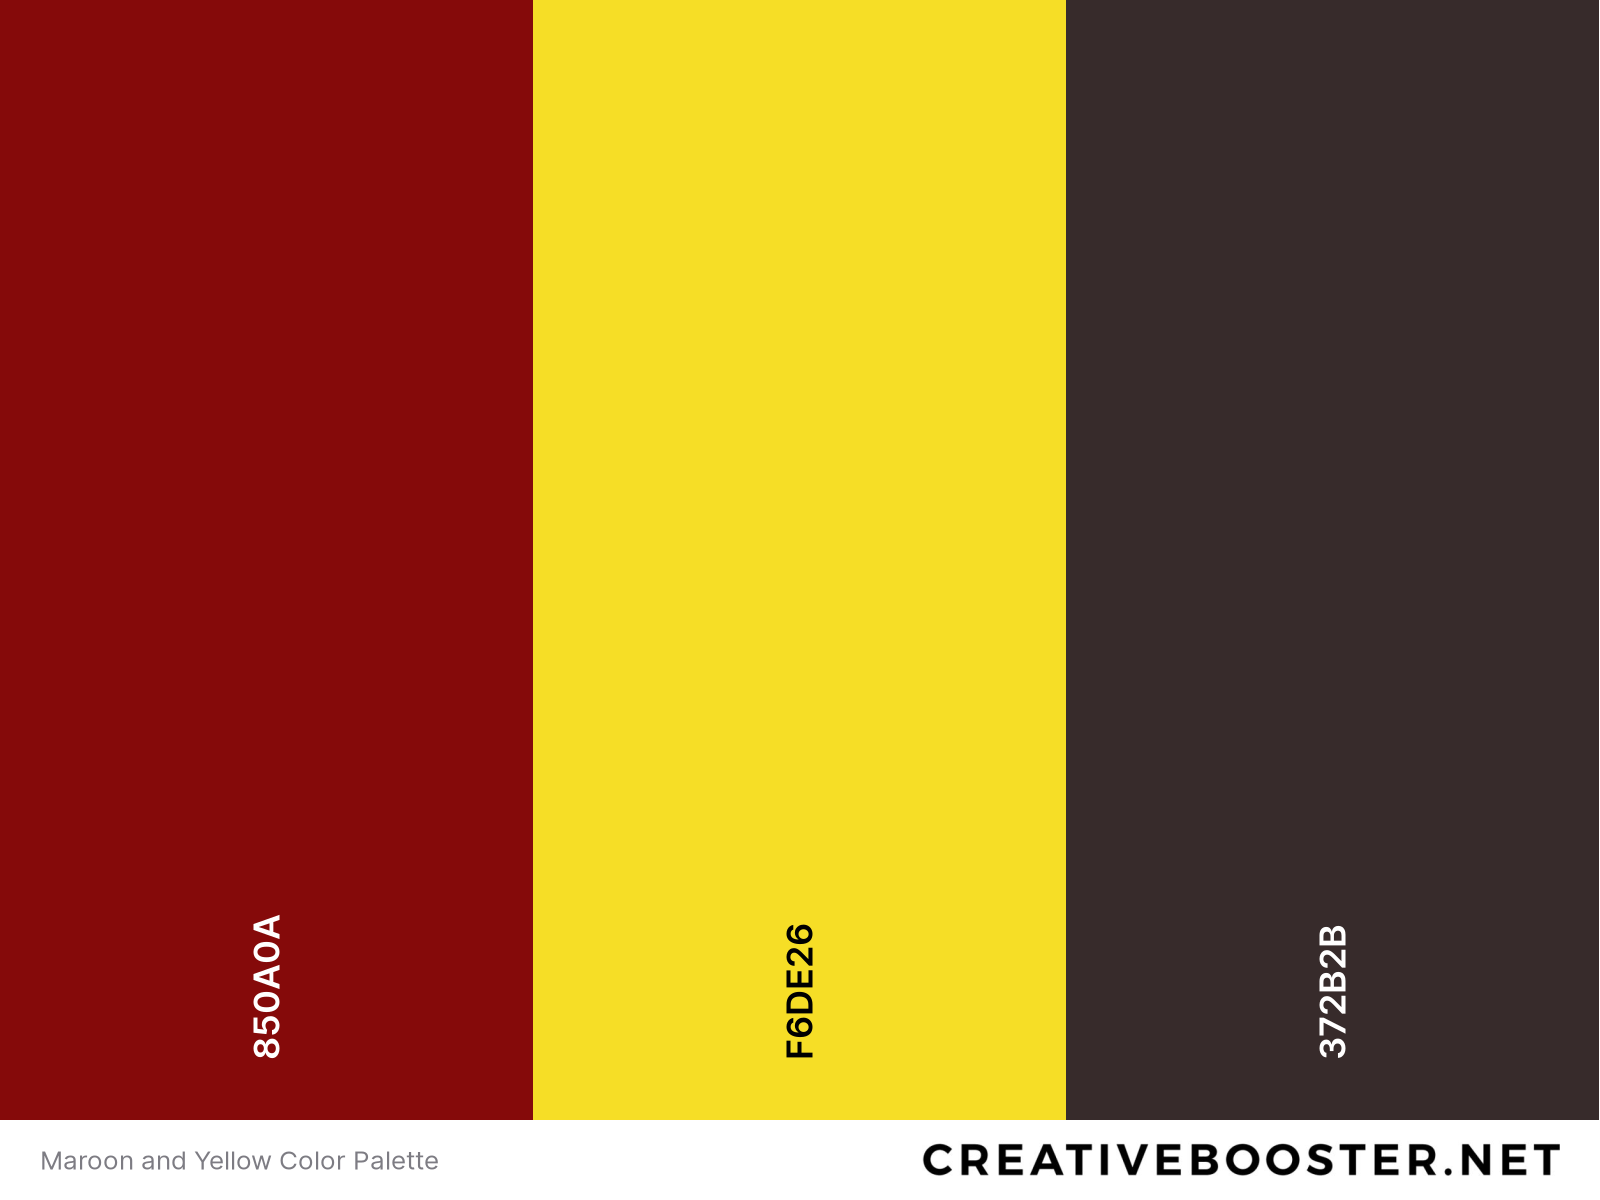 Maroon and Yellow Color Palette